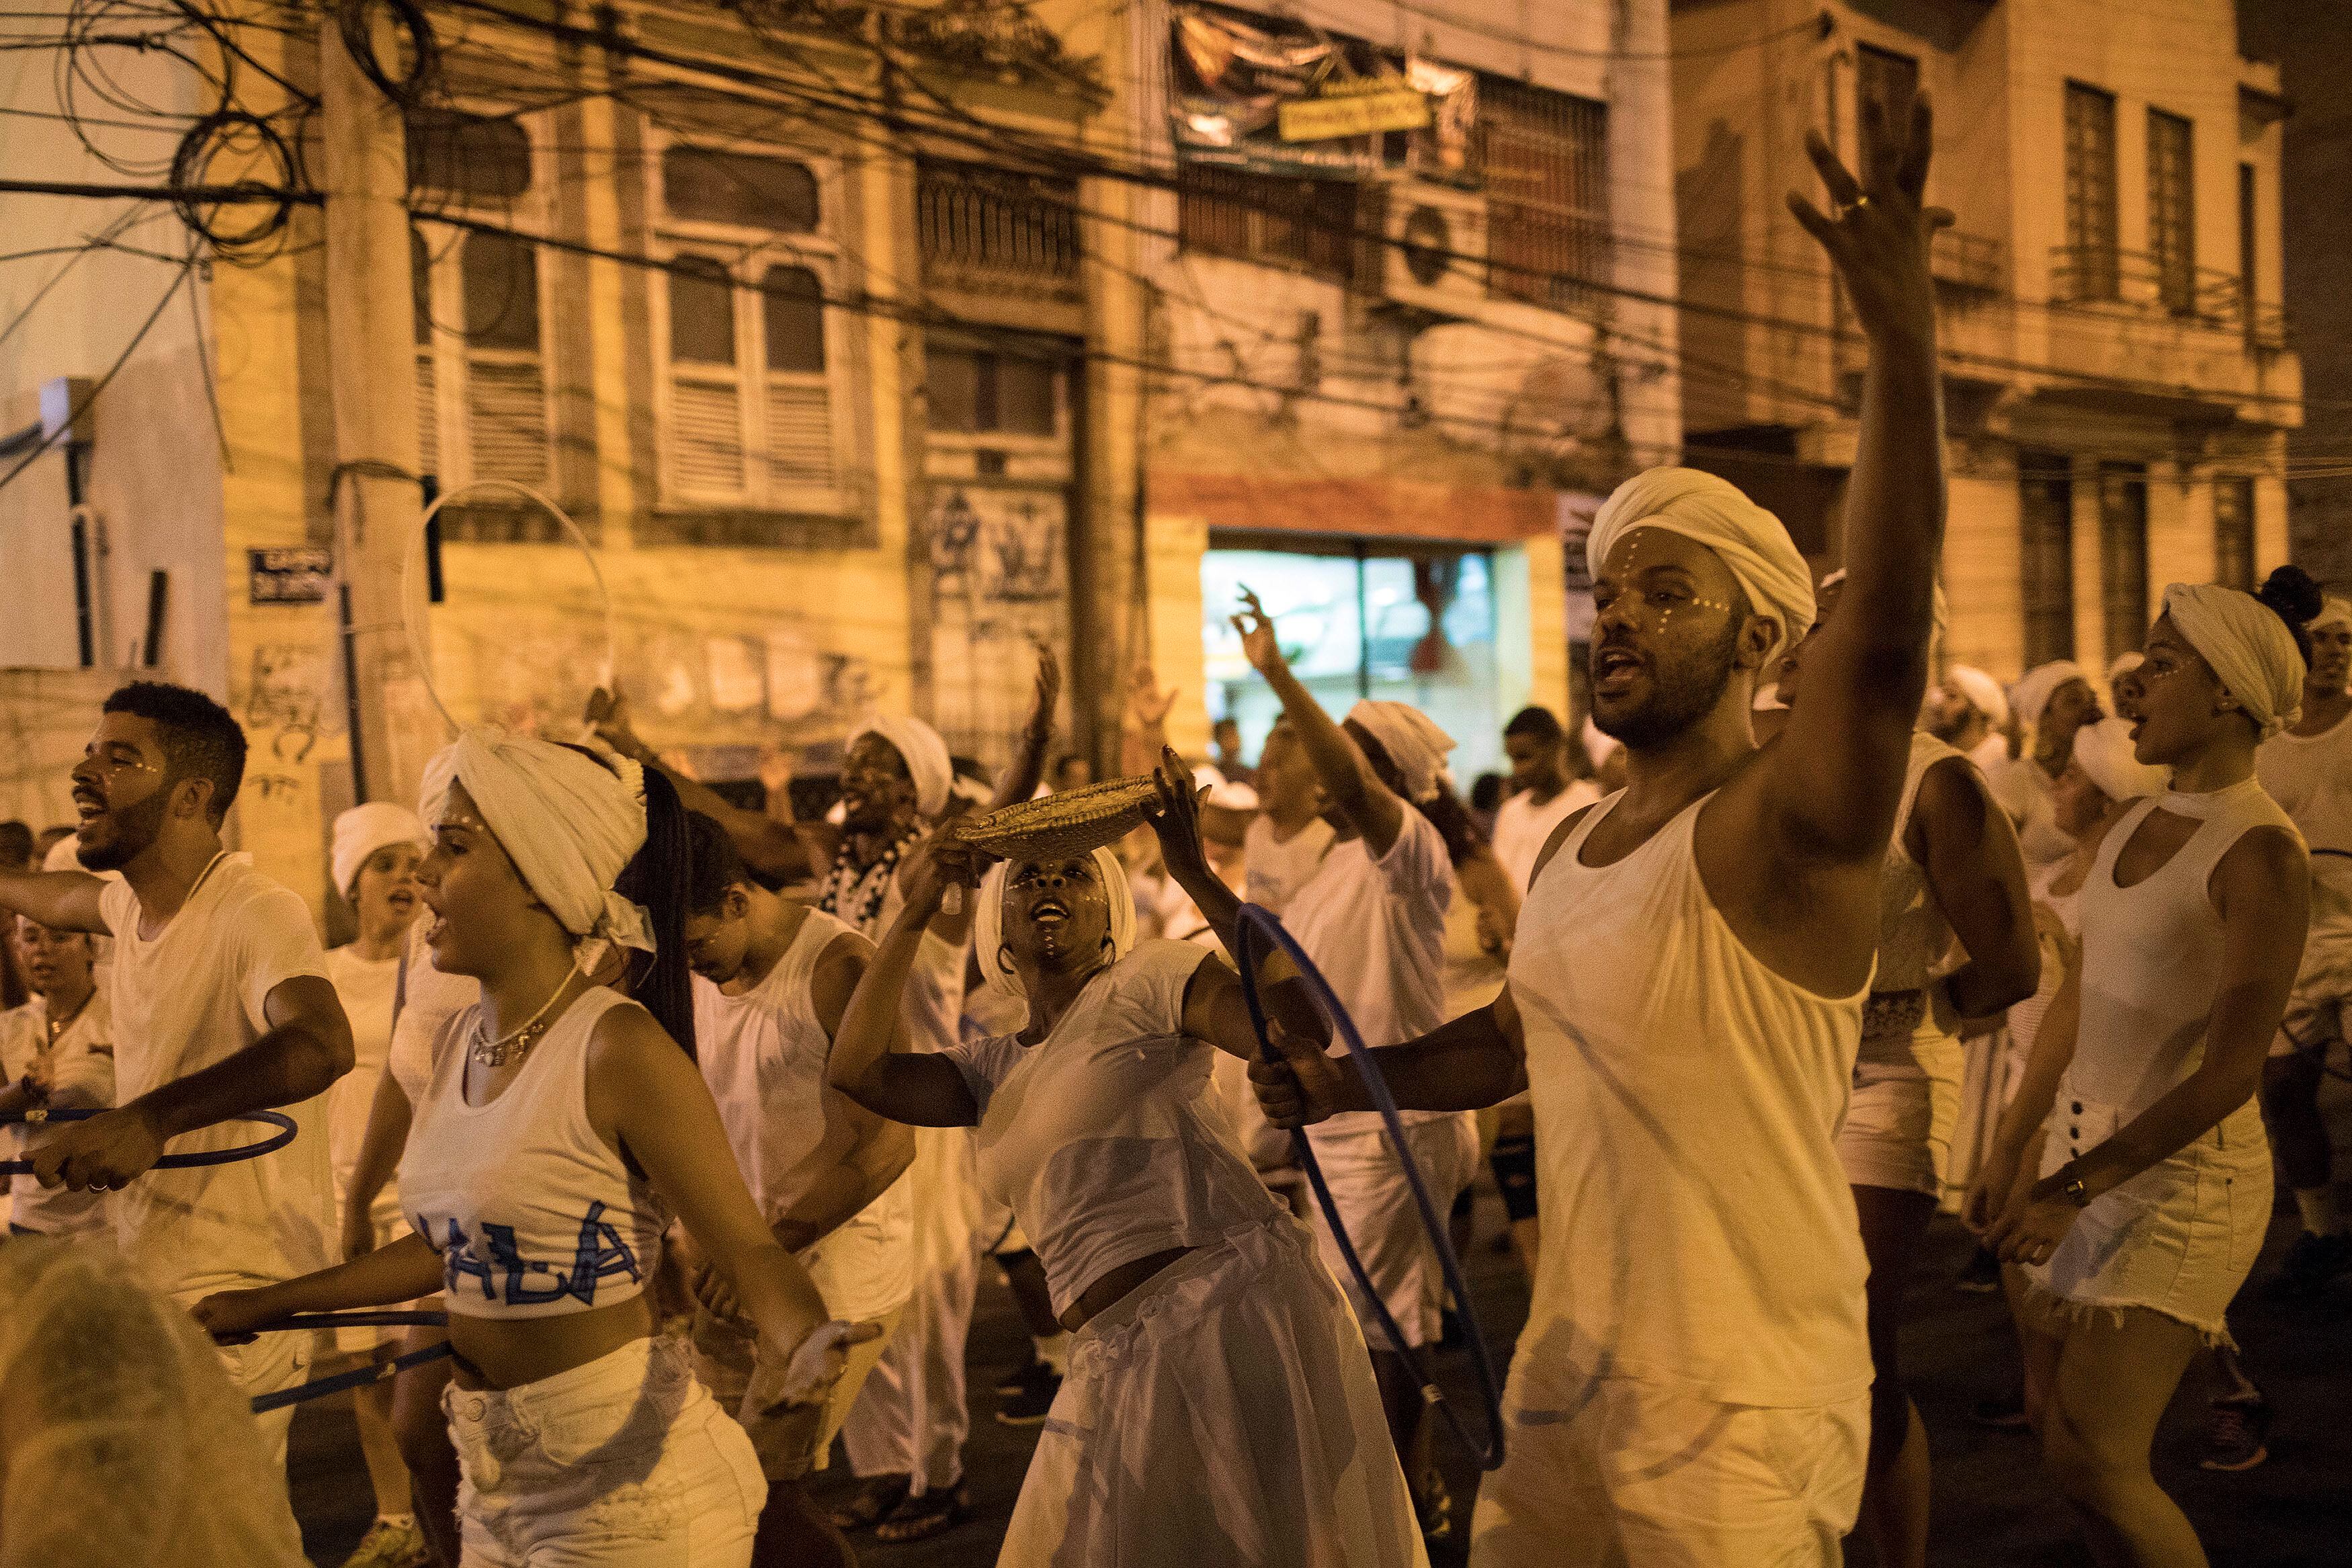 In this Jan. 22, 2018 photo, members of the Paraiso do Tuiuti samba school rehearse their dances and songs that make reference to Brazil's history with slavery, in the streets of Rio de Janeiro, Brazil. "It's not just racism against blacks or whites," said Dandara Silva, a hairdresser and dancer in the group. "There is a form of social slavery and we are fighting against that." (AP Photo/Leo Correa)